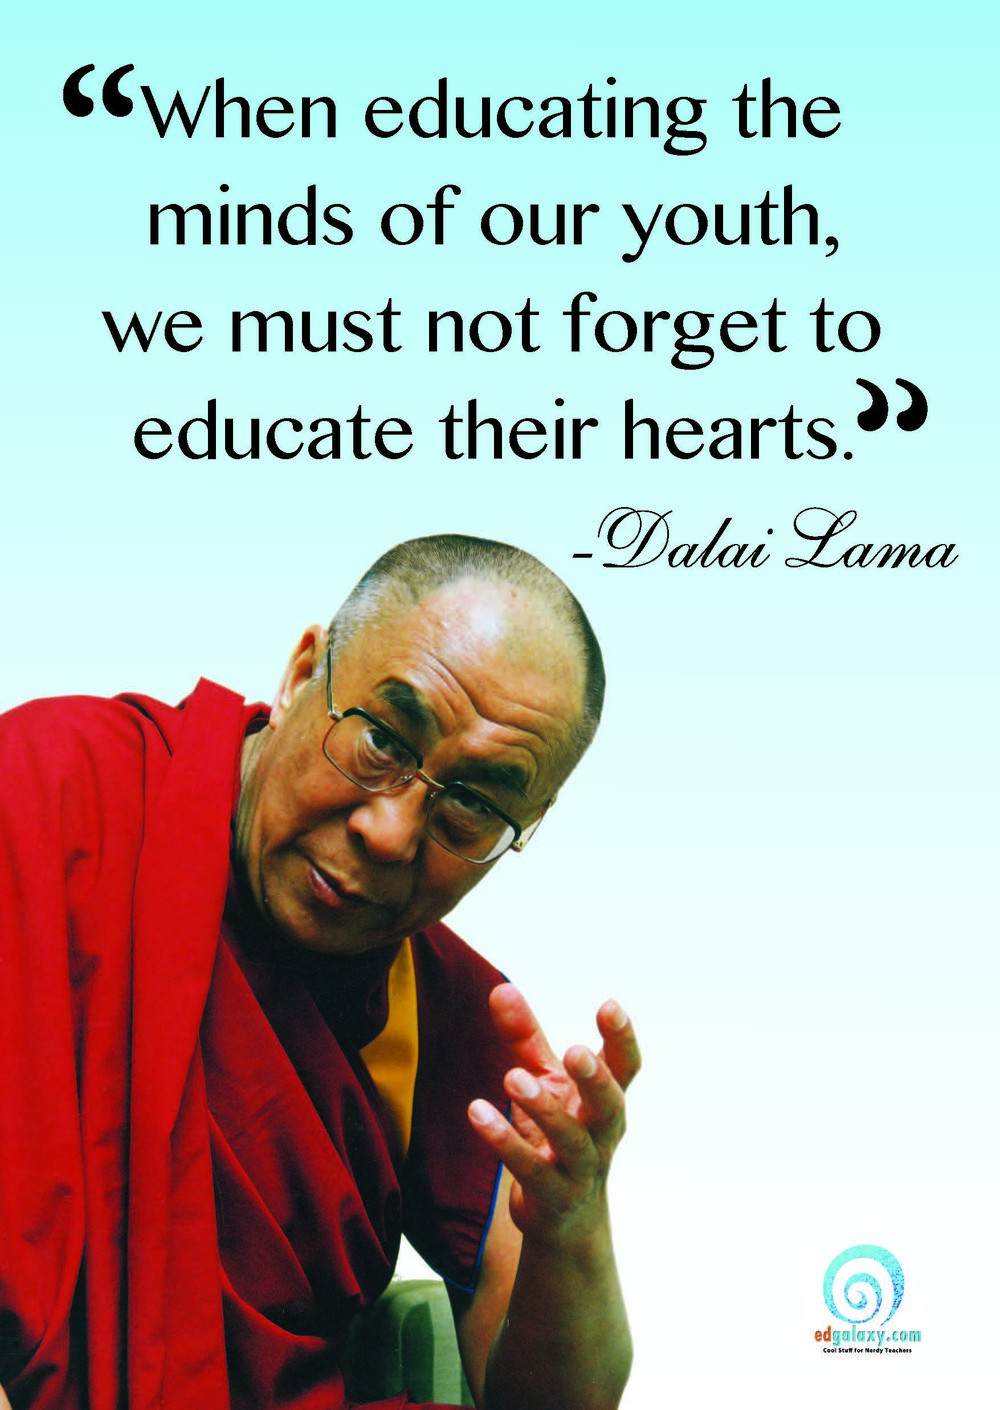 Inspirational Education Quotes For Teachers
 Education Quotes Famous Quotes for teachers and Students